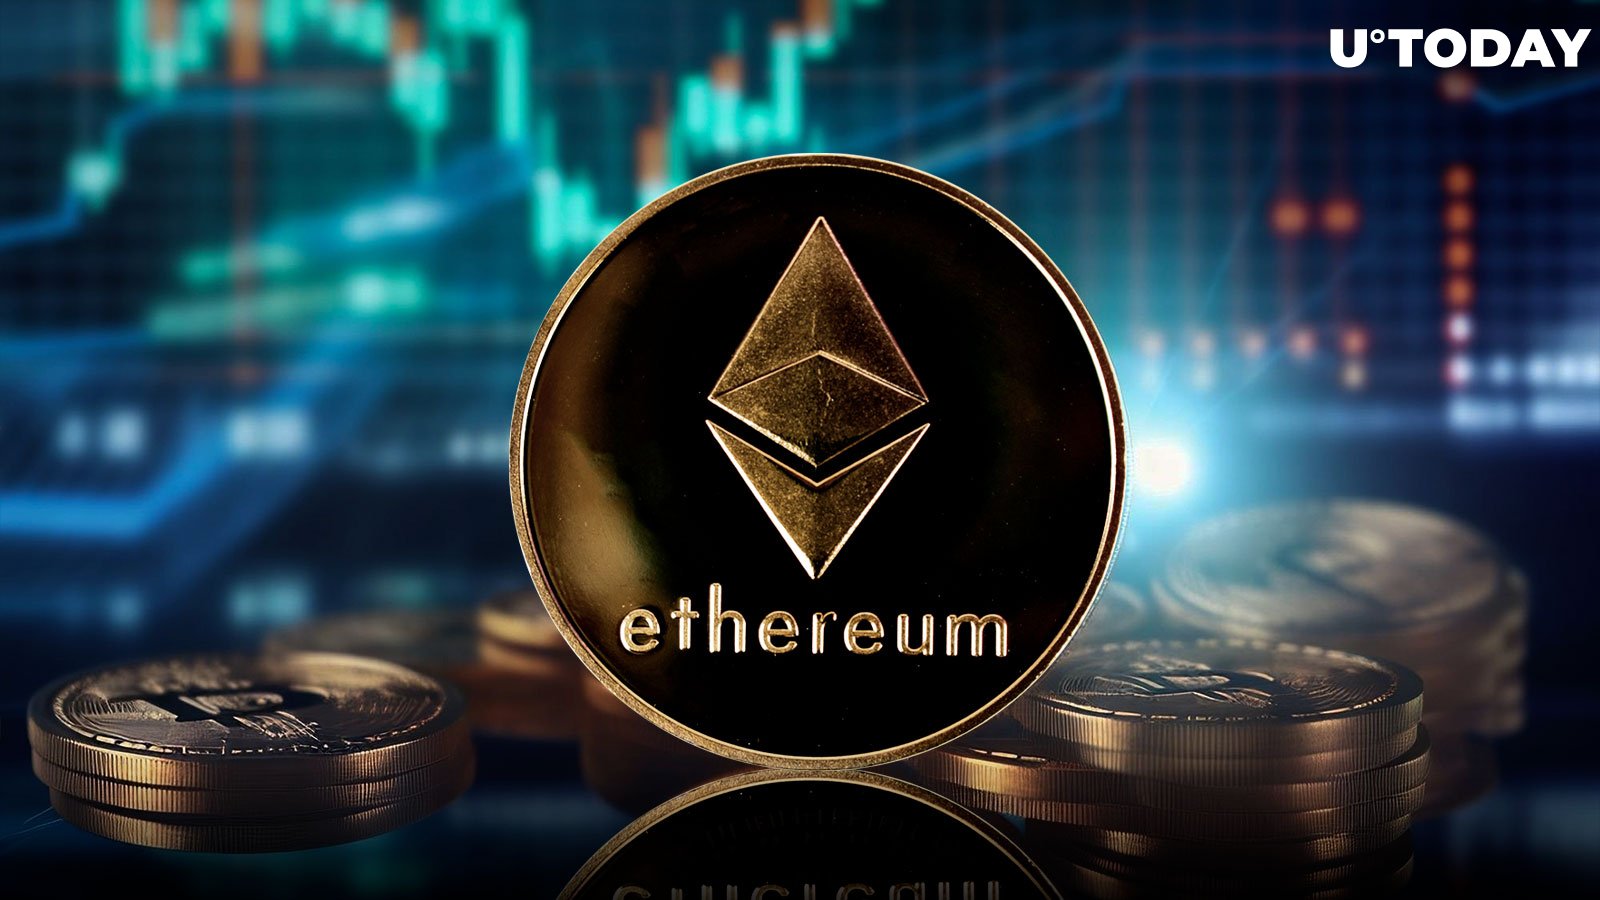 Ethereum (ETH) Price Holds Steady, Analyst Says 